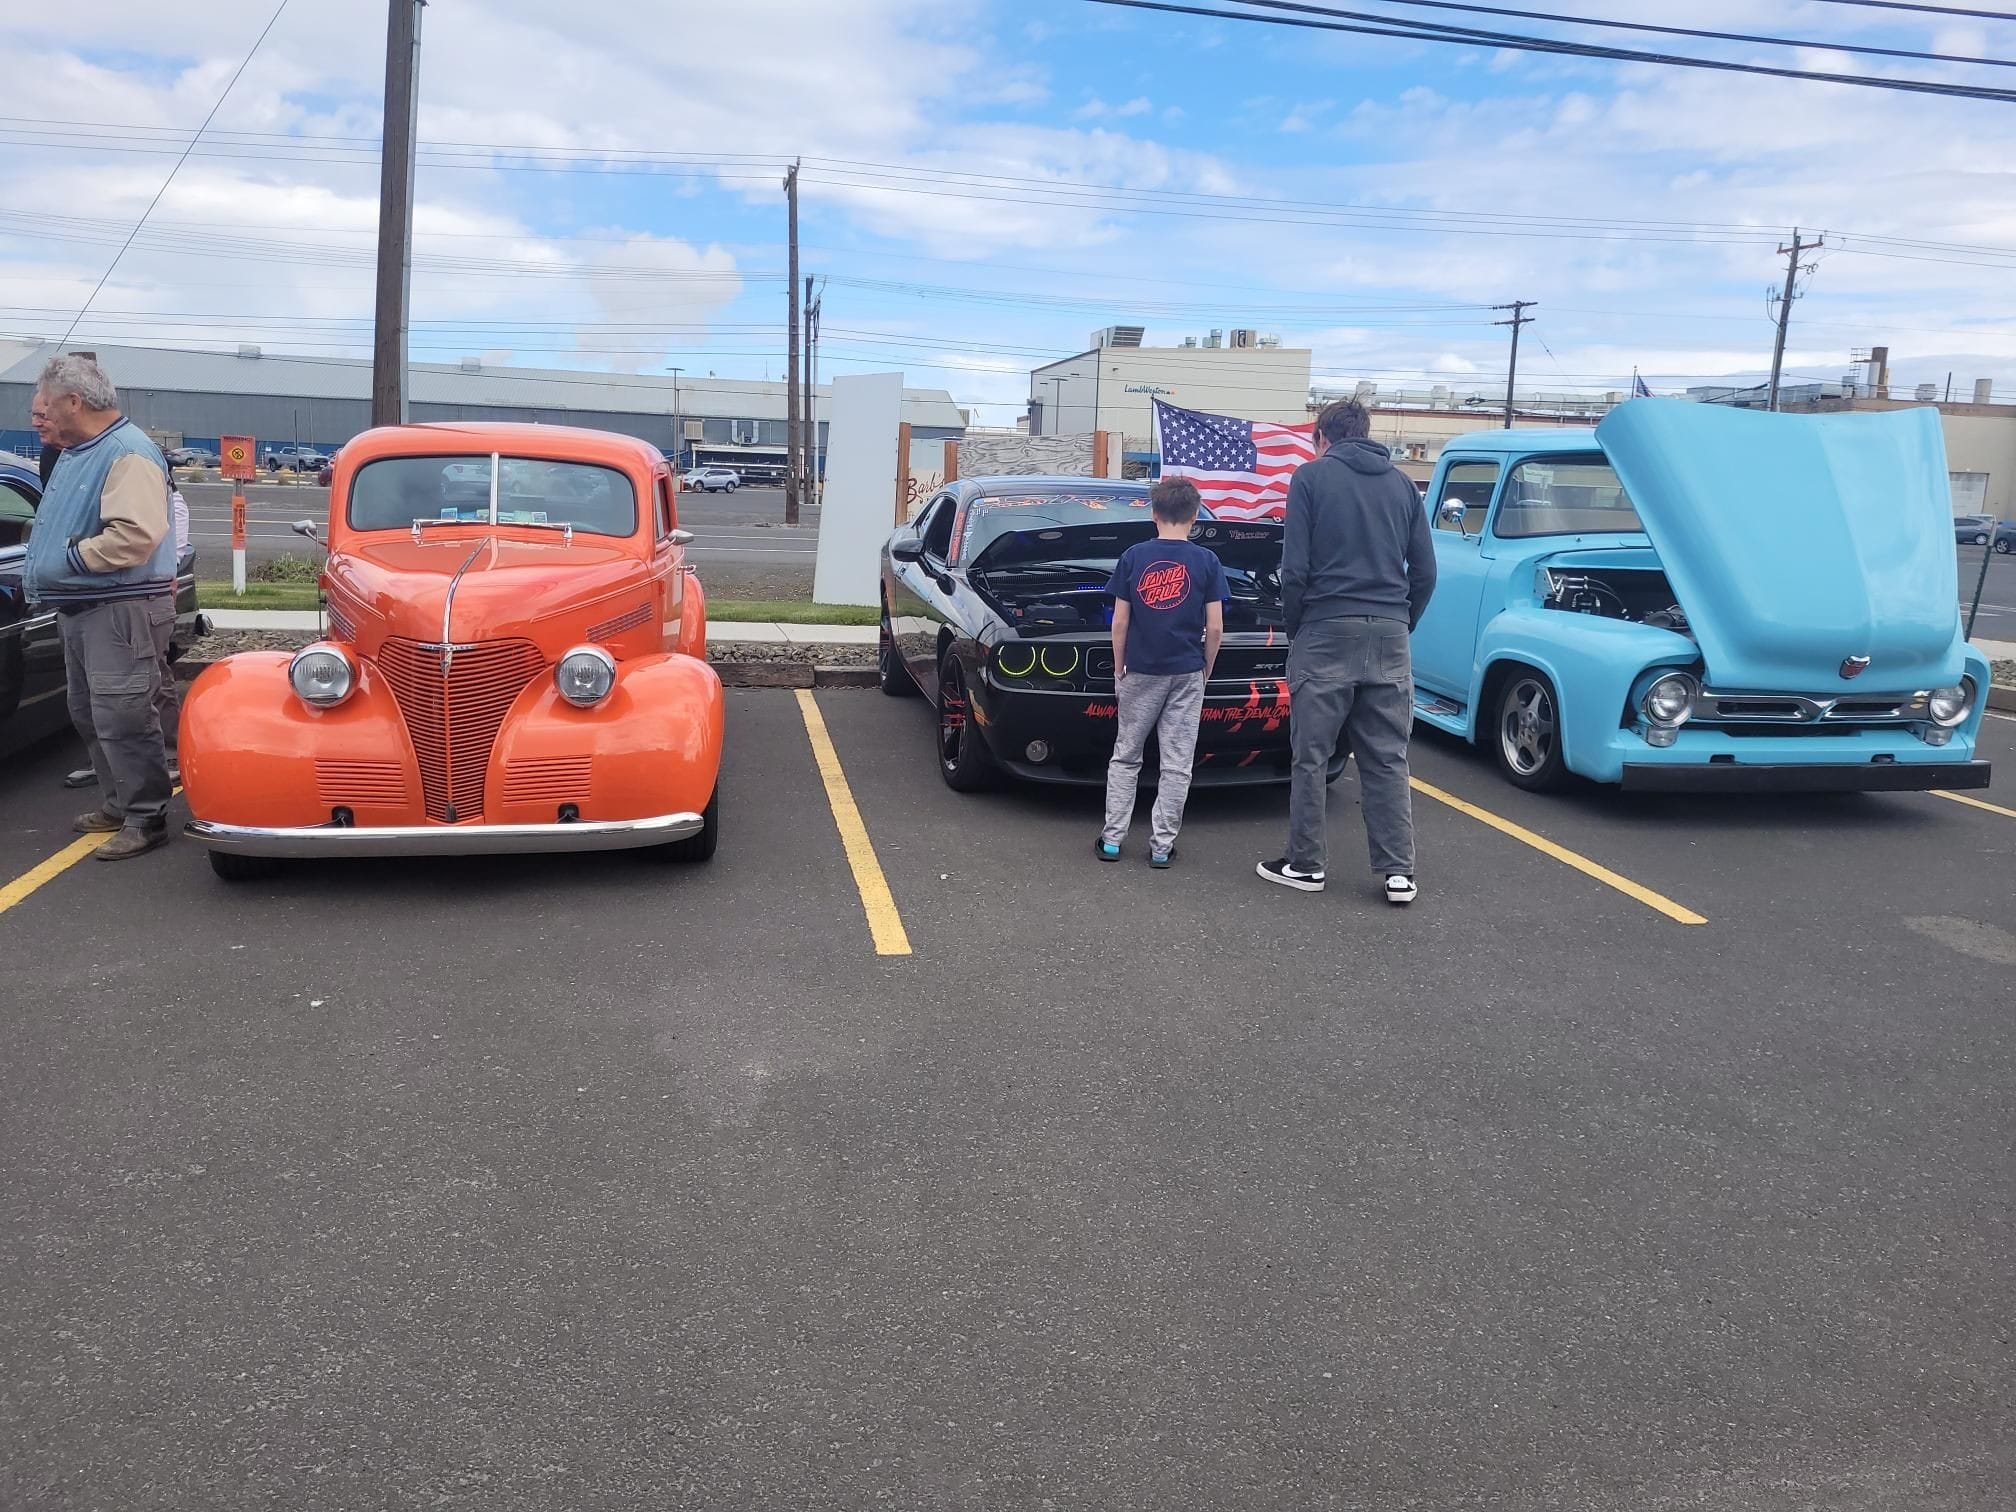 Plymouth Coupe, Dodge SRT8, Ford PU